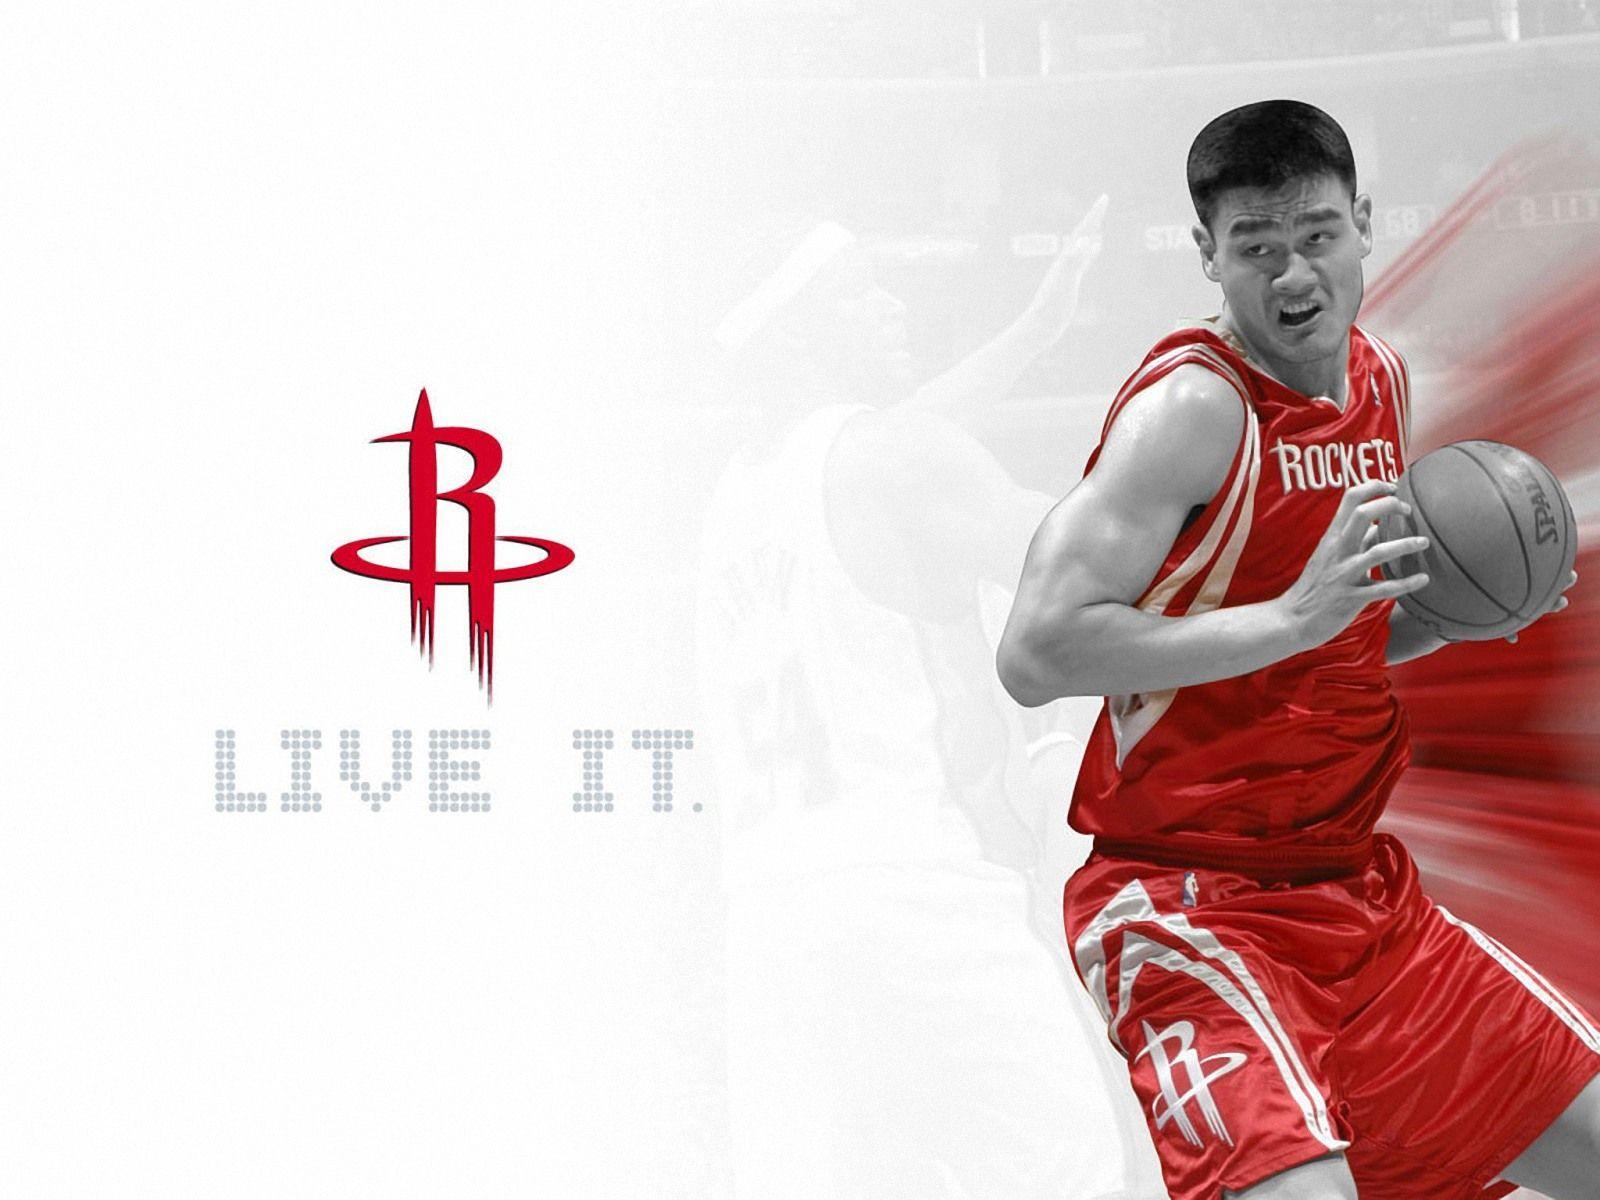 HD wallpaper Yao Ming Holding Basketball on His Left Hand While Jumping  athletes  Wallpaper Flare